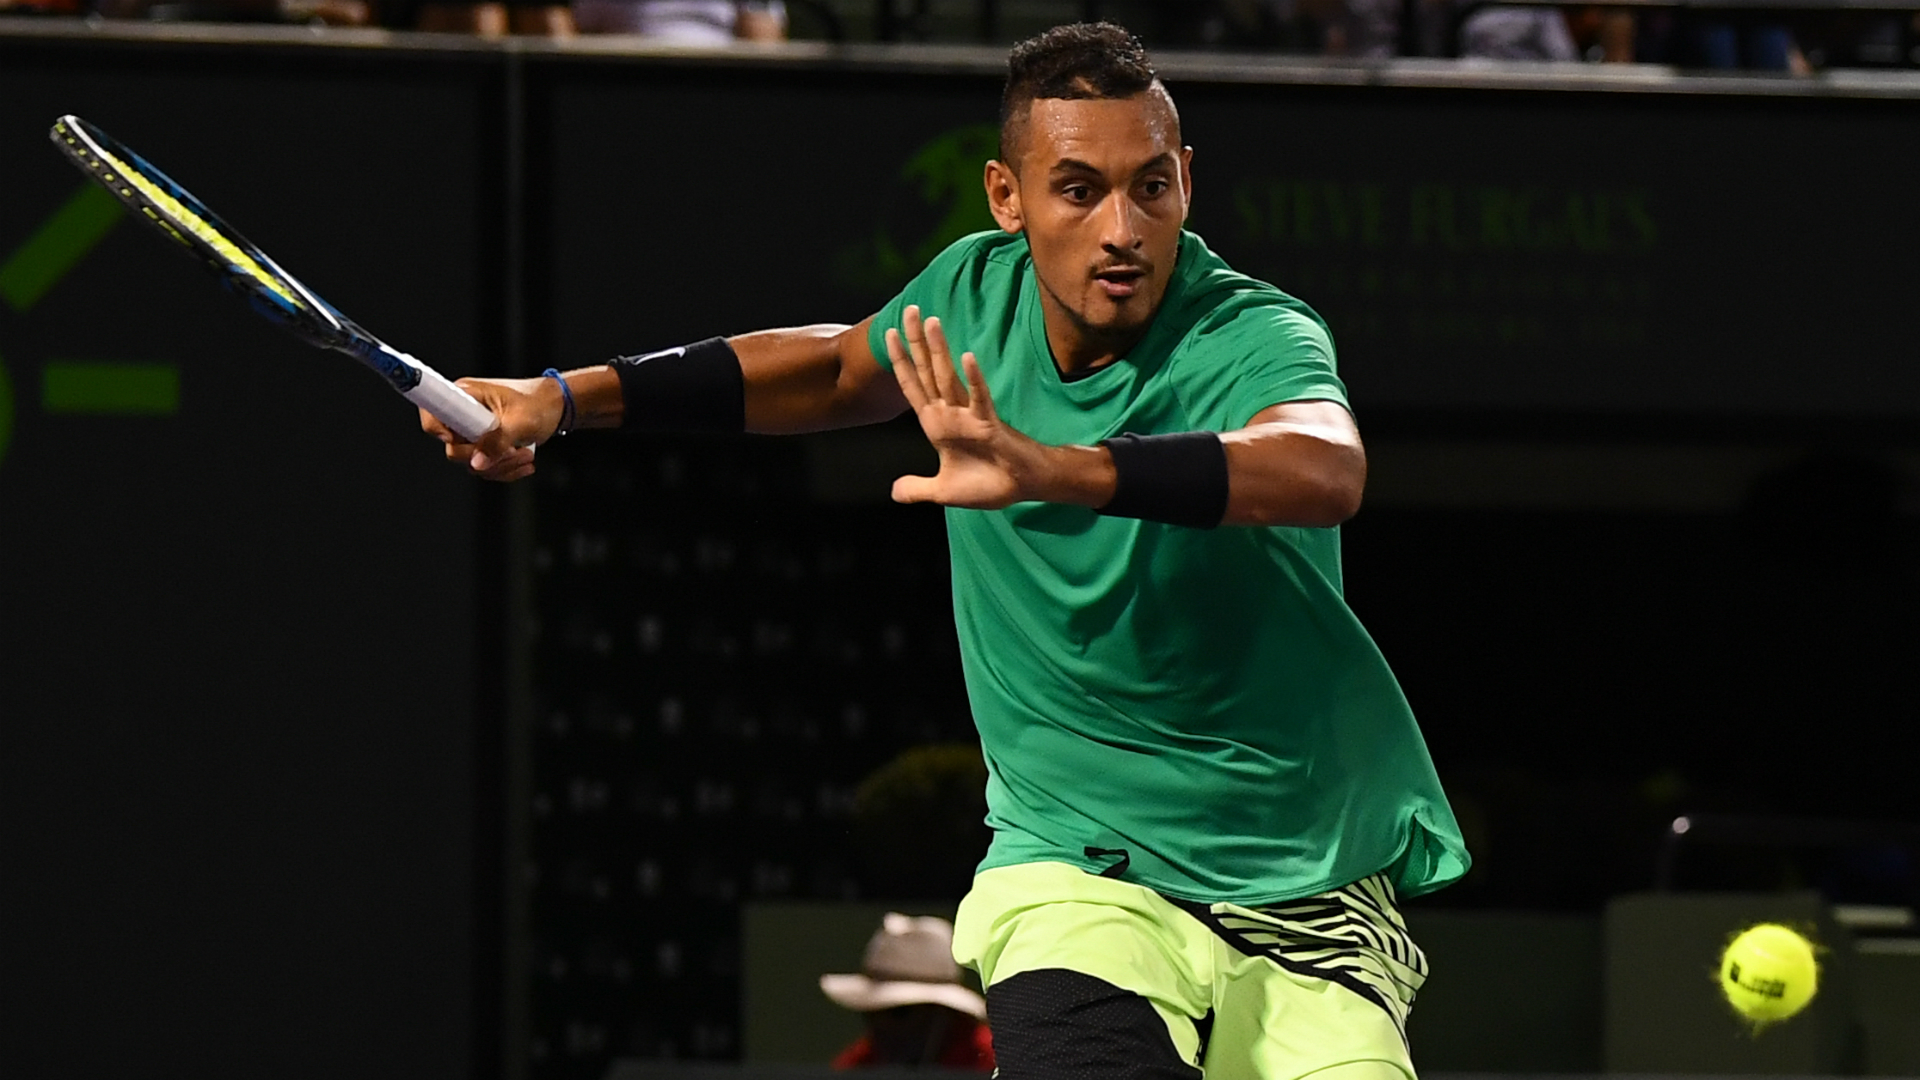 Nick Kyrgios gets another chance at Roger Federer, this time